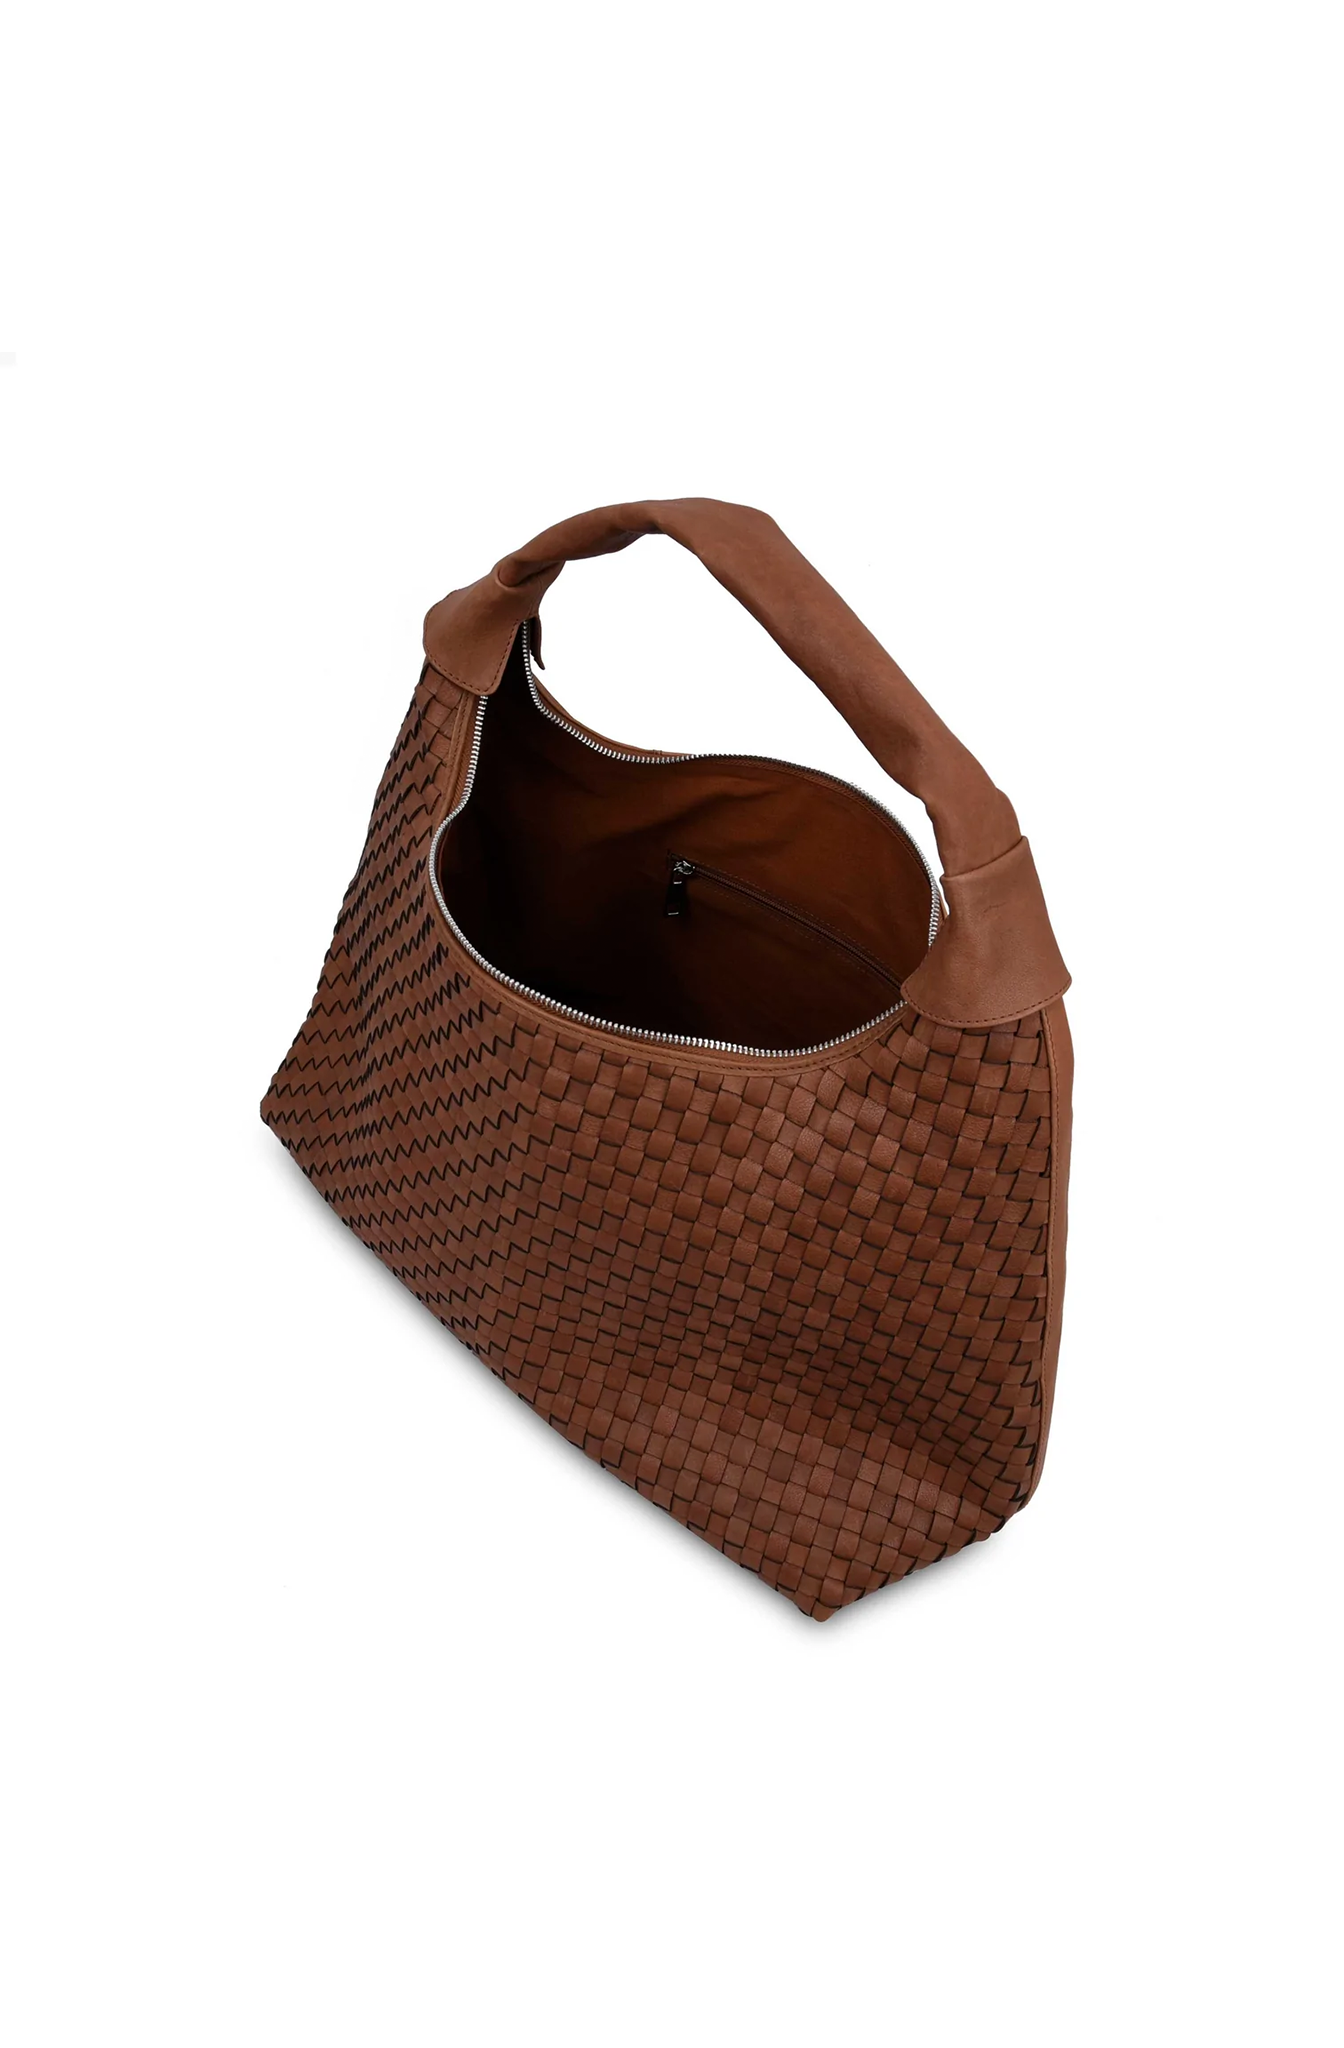 This stylist maxi dandy bag is braided brown leather and has a main compartment with a zip closure.